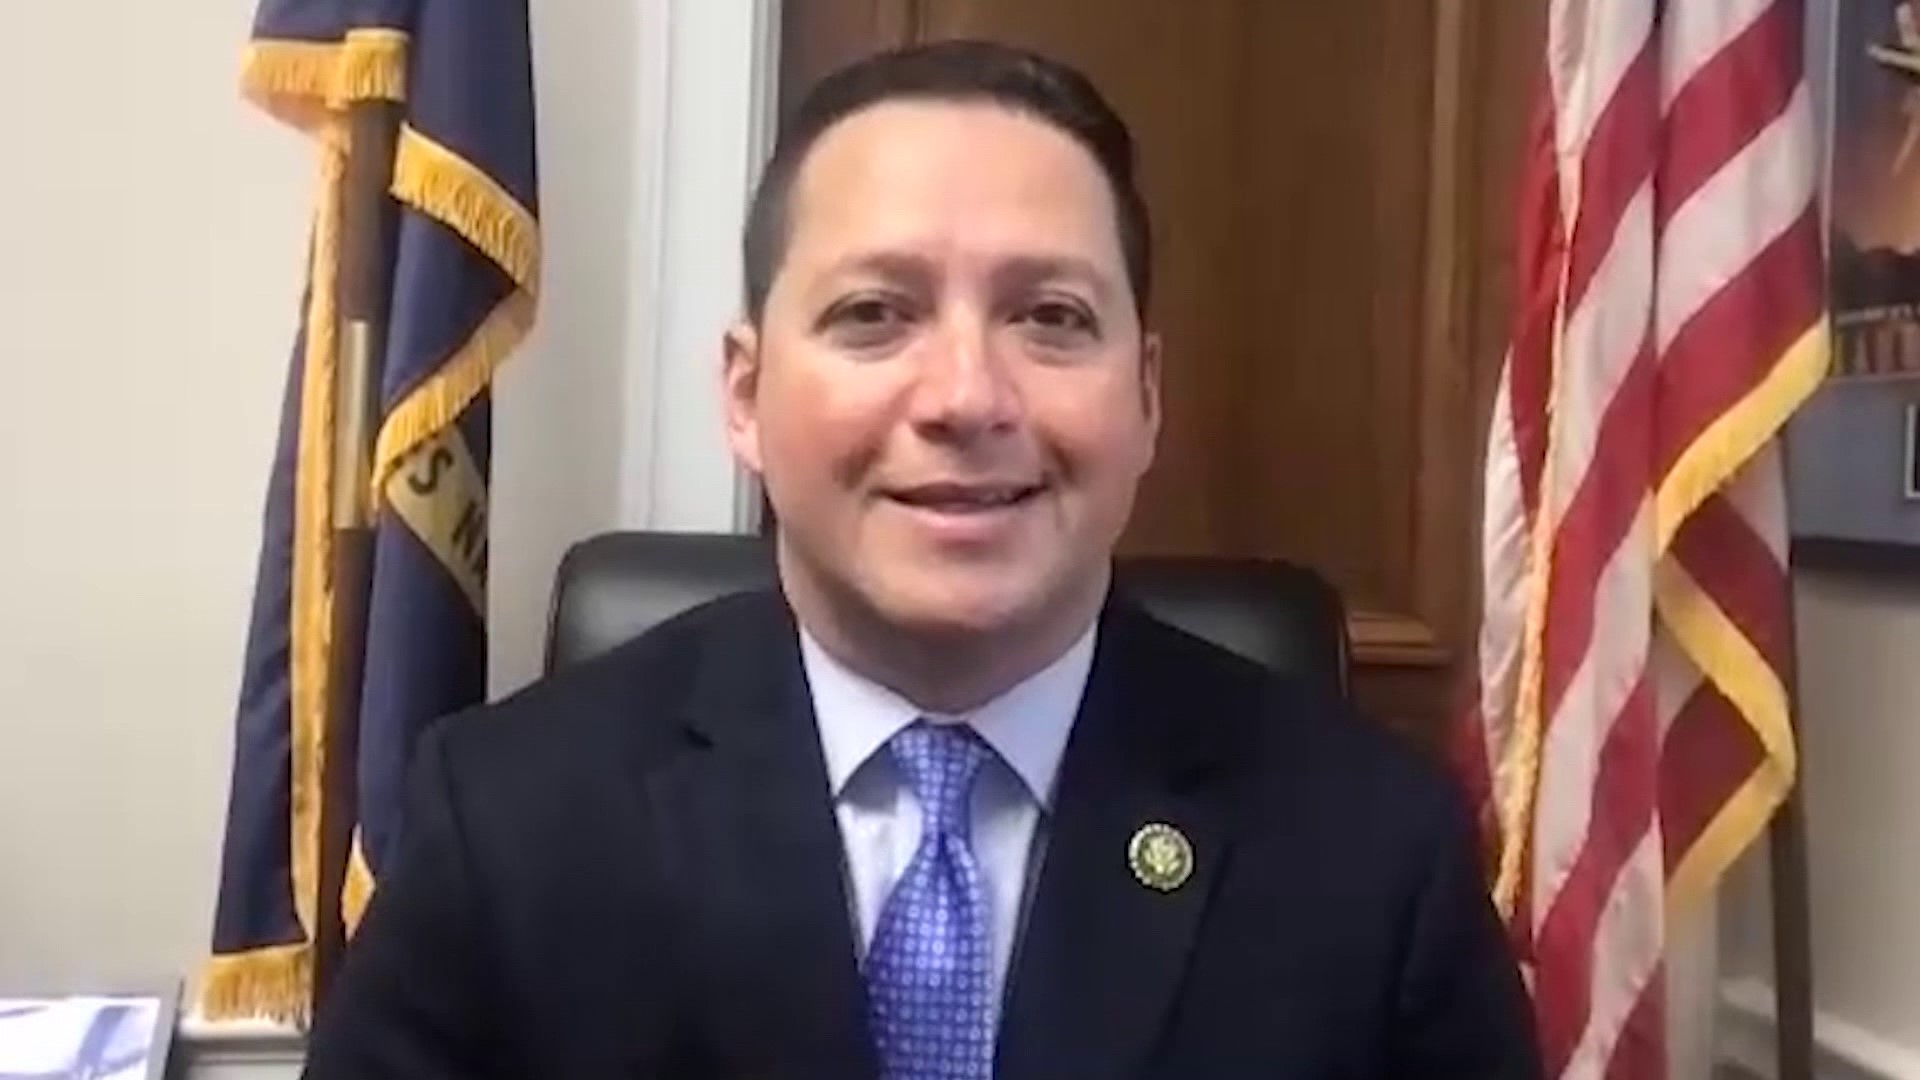 Rep. Tony Gonzales, who represents two-thirds of Texas-Mexico border, addresses a controversial state immigration bill.